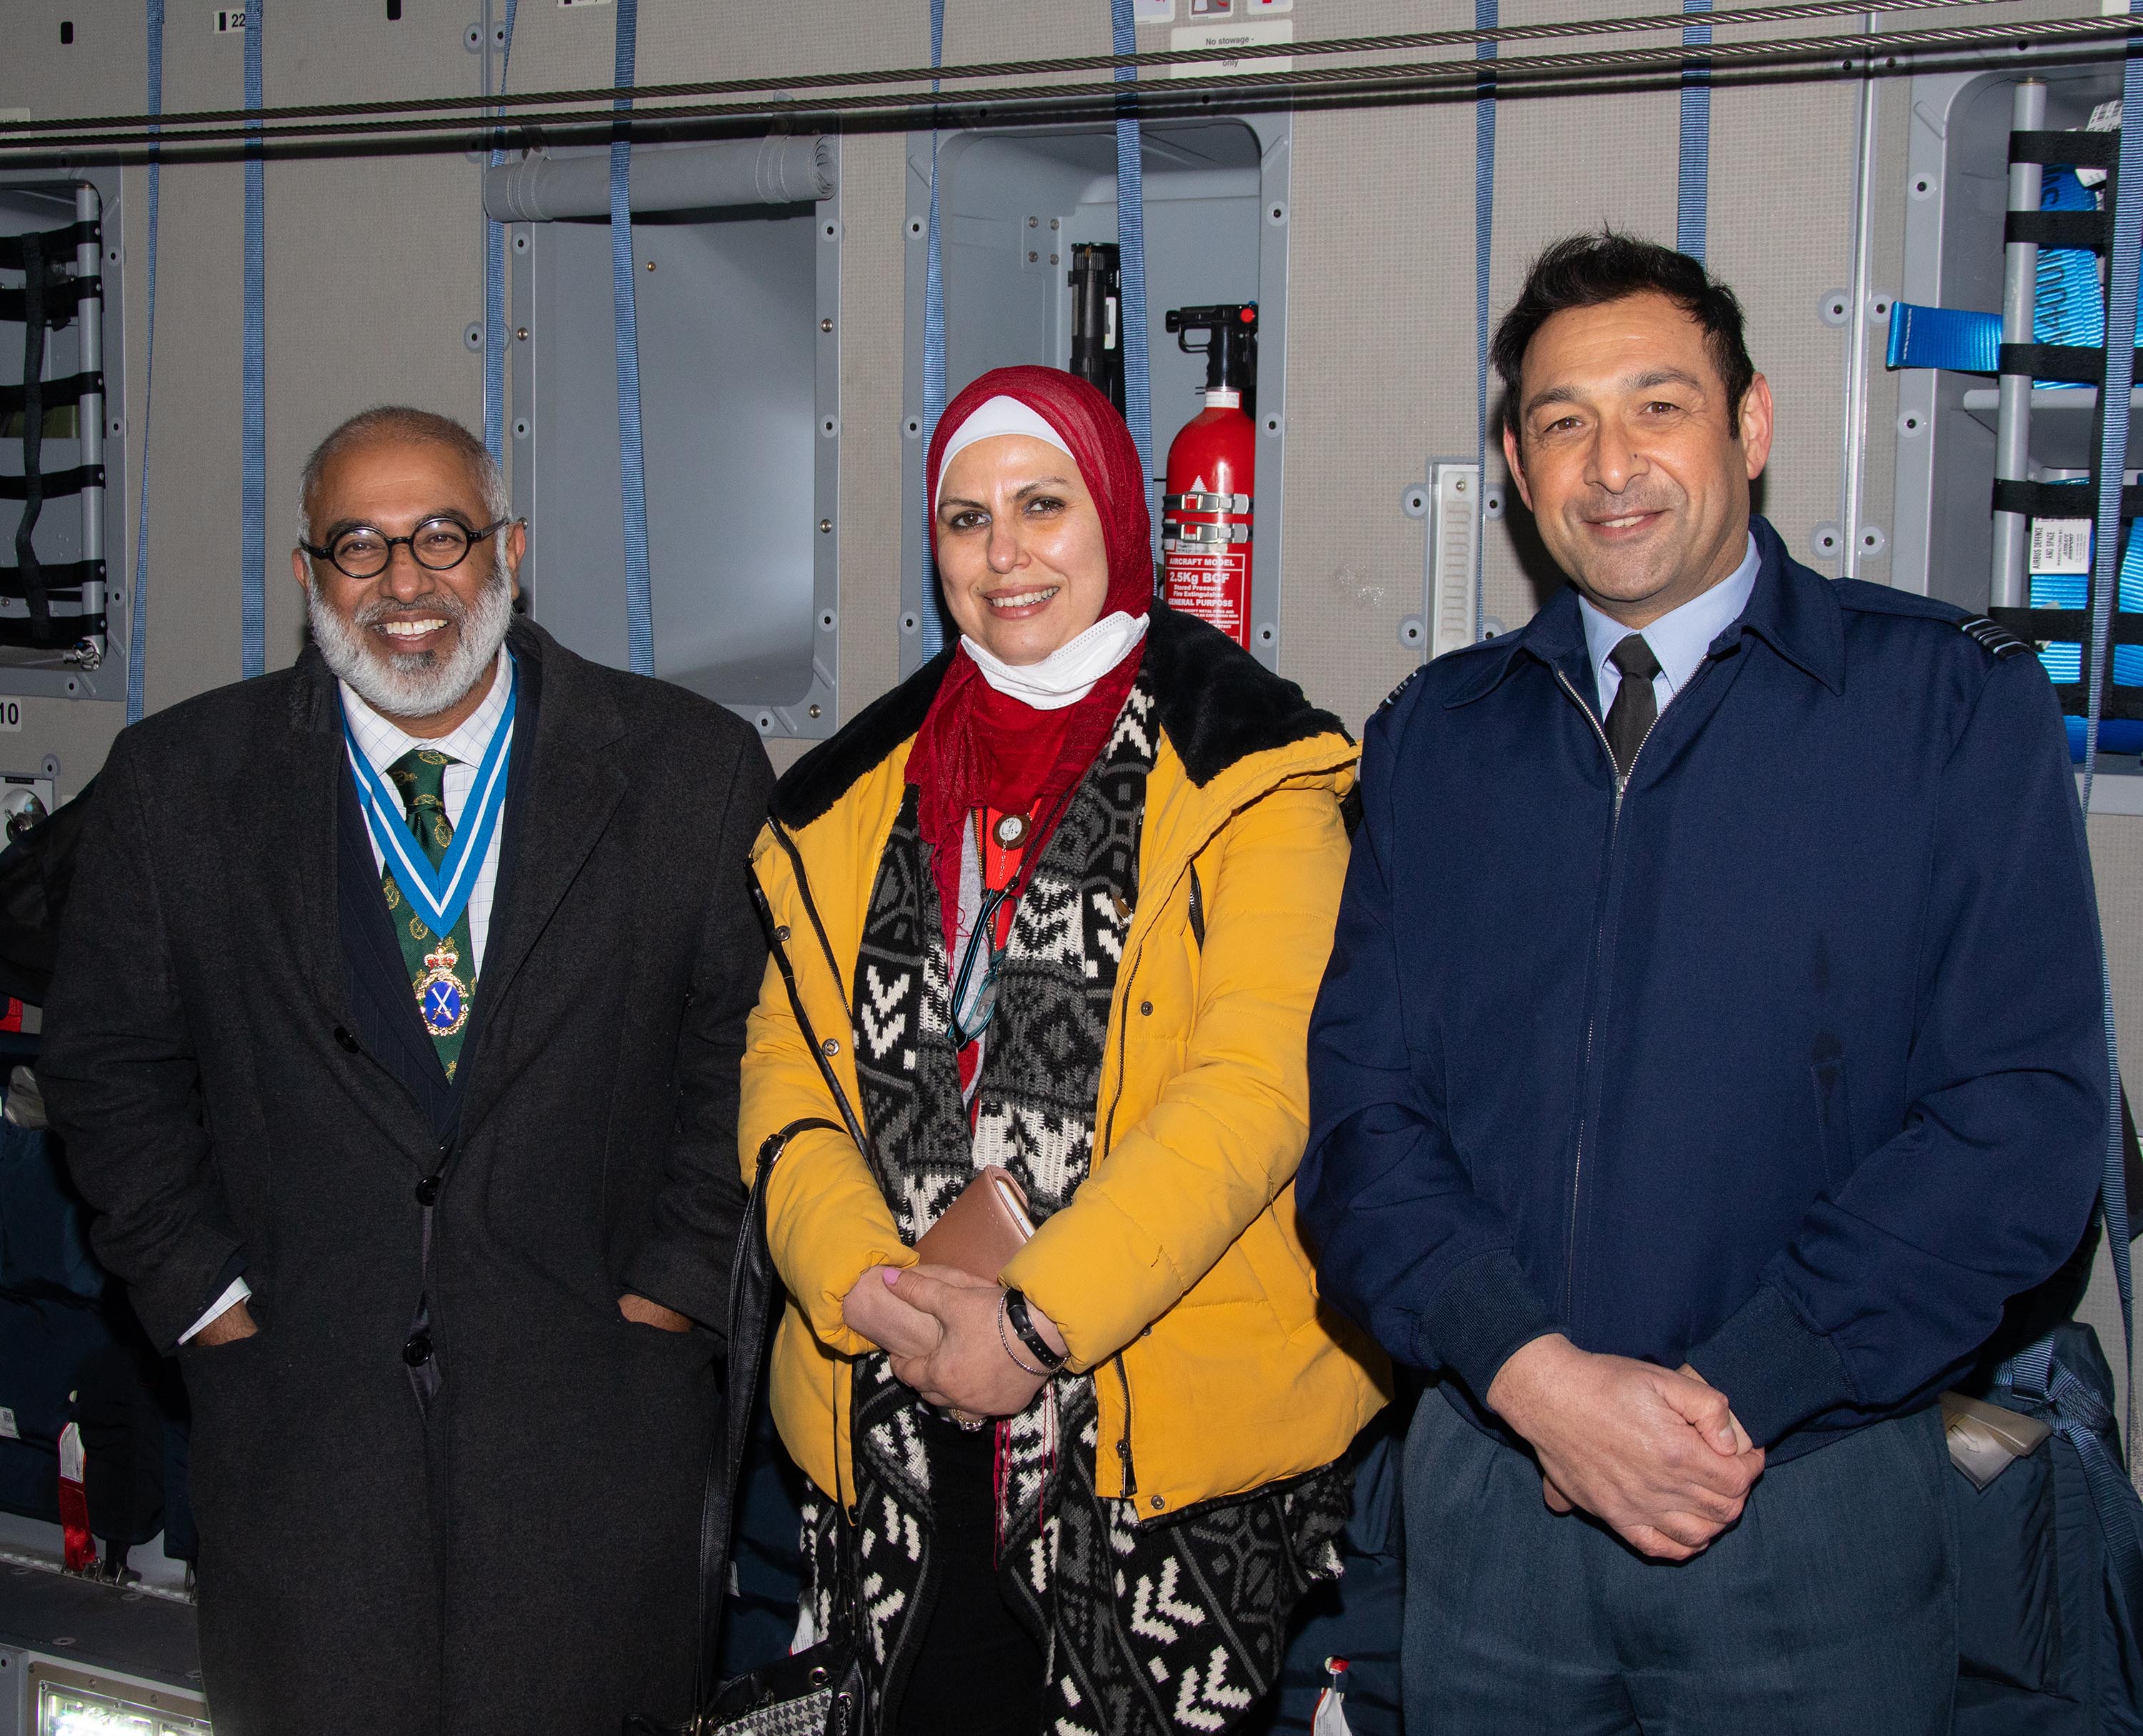 RAF Brize Norton Builds Relationships with Leaders from Muslim Communities